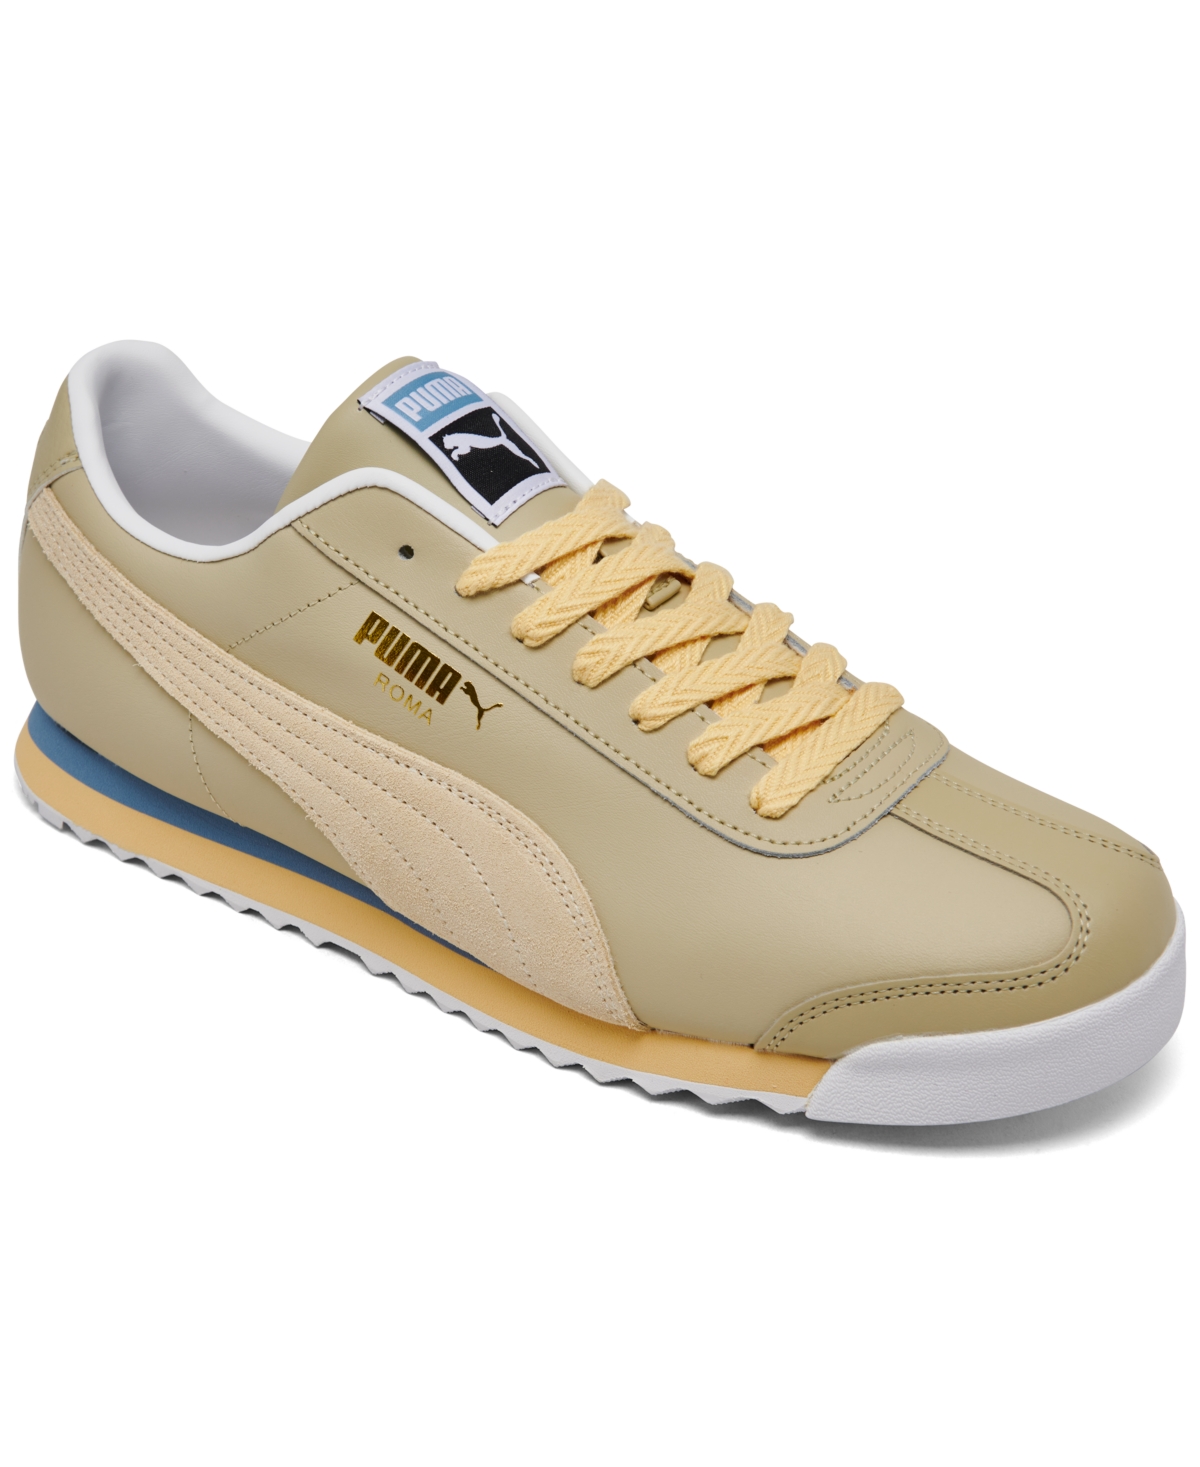 Men's Roma Expedition Casual Sneakers from Finish Line - Beige tan